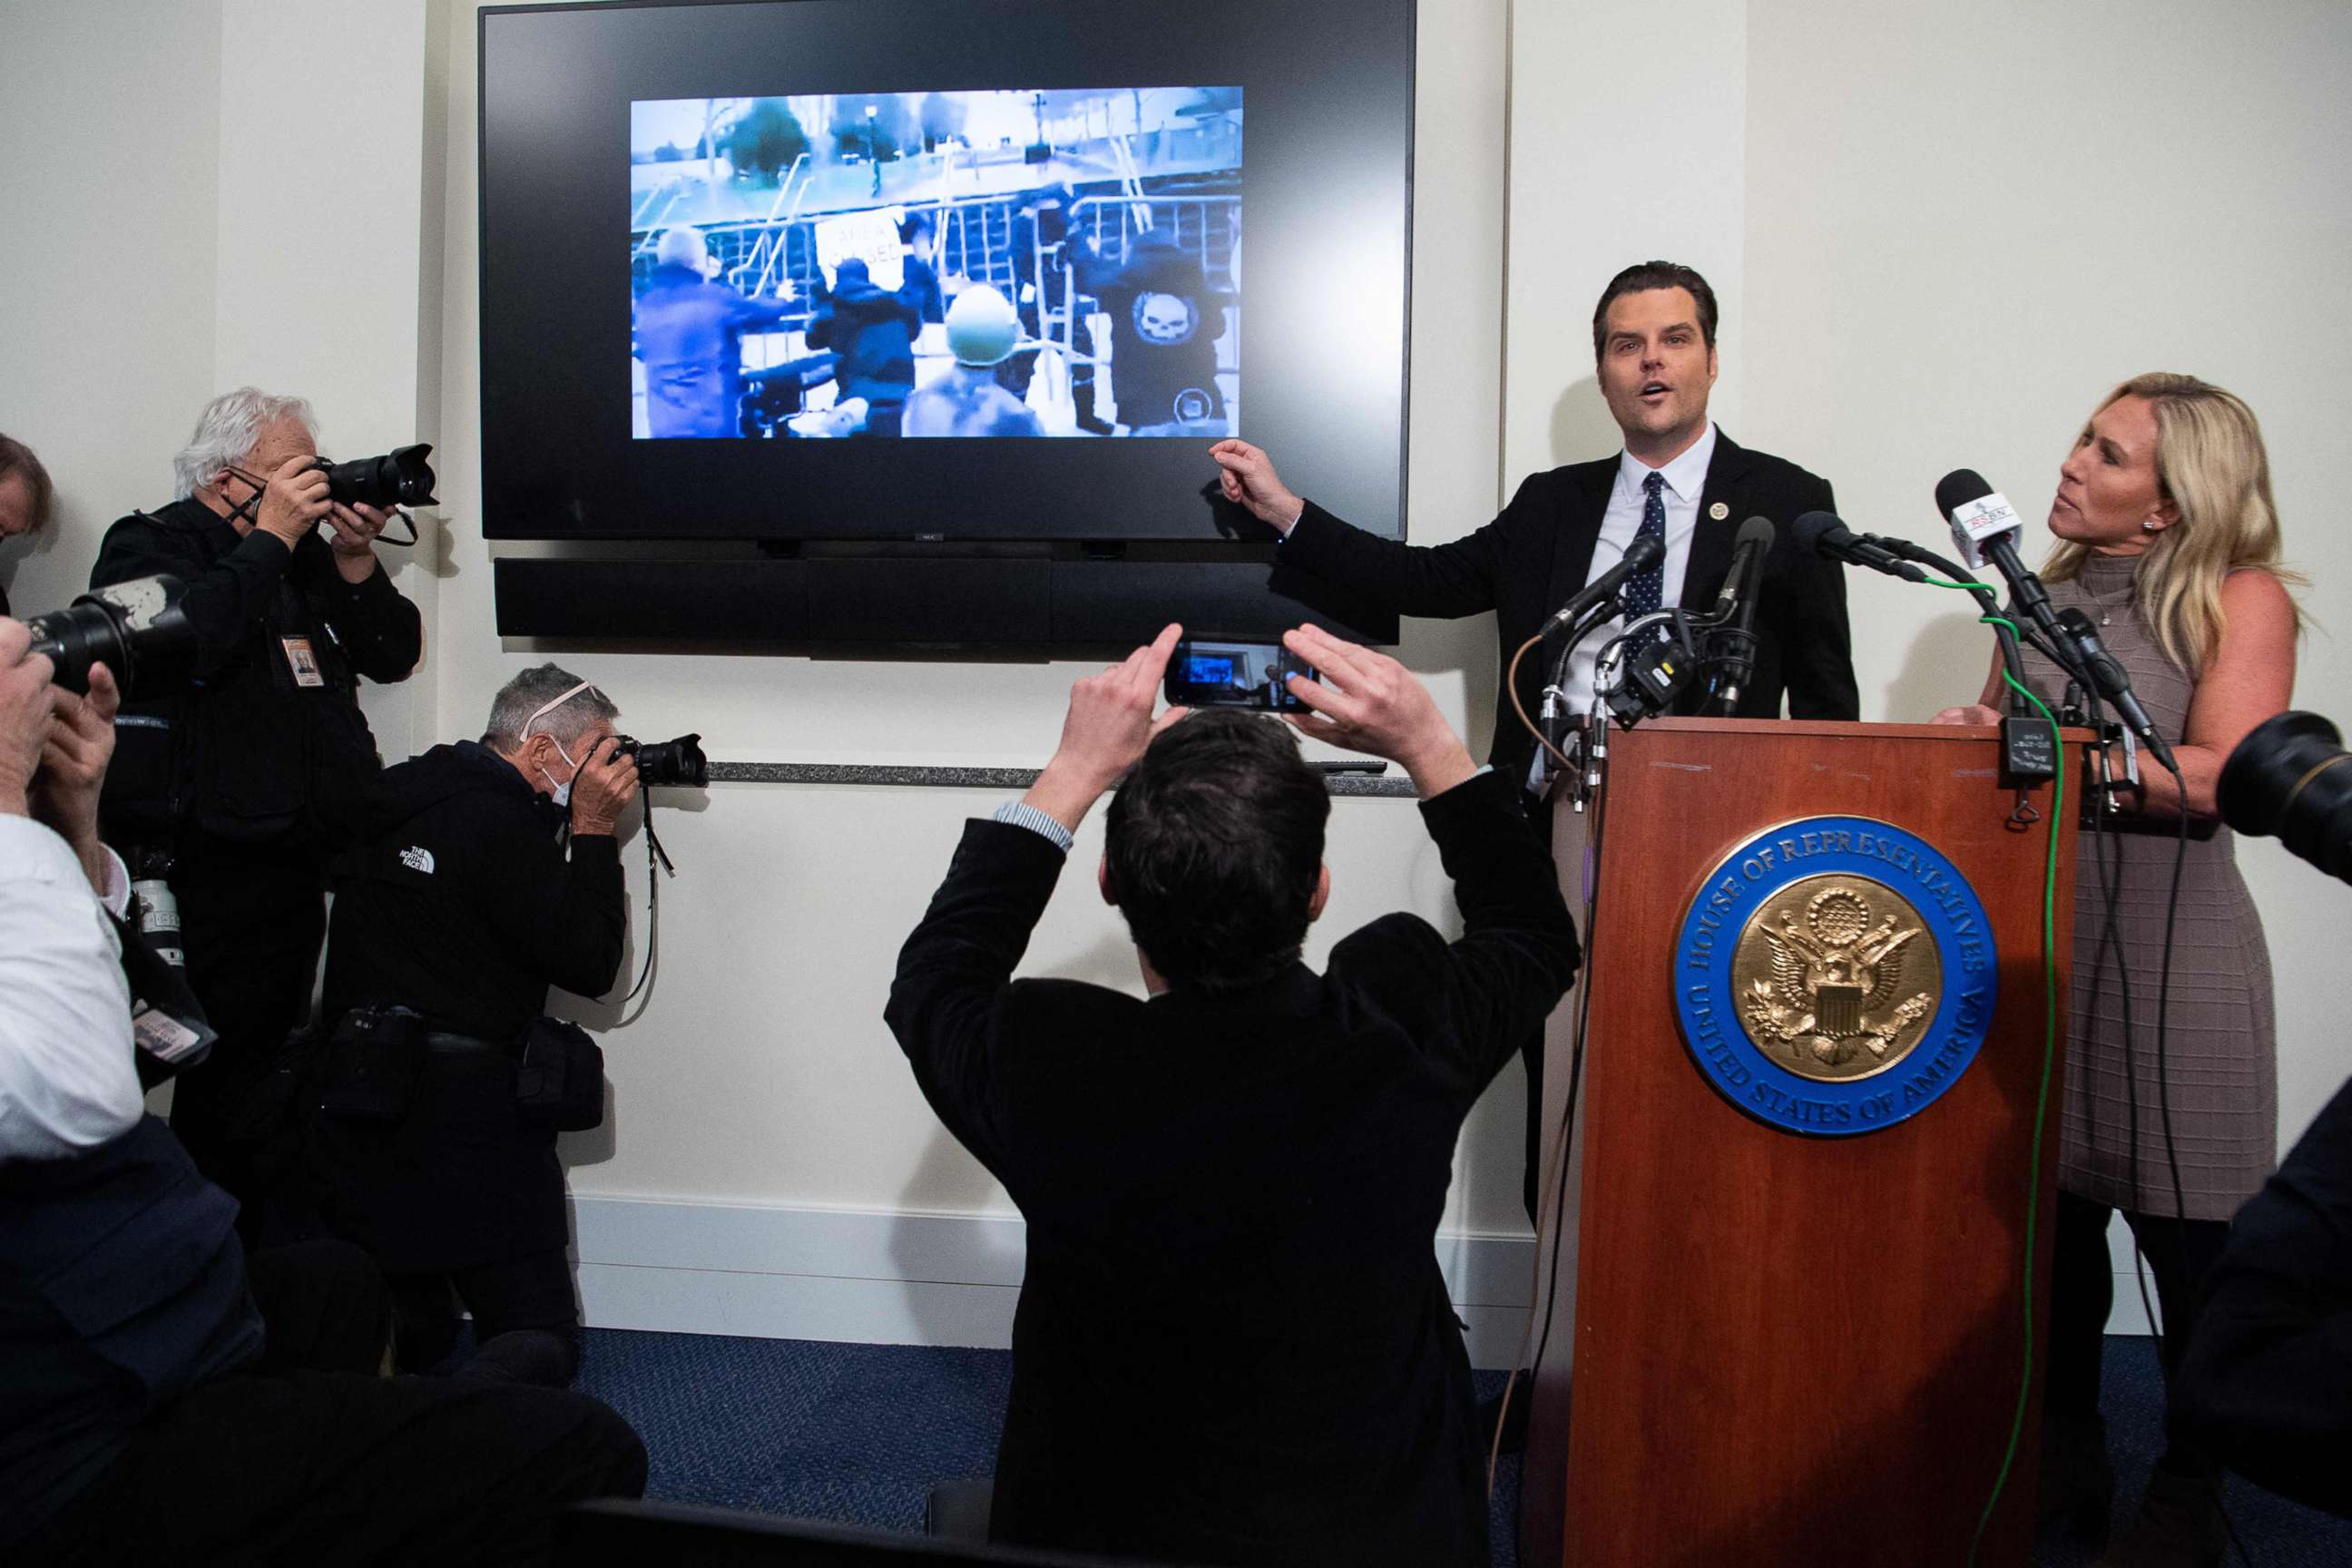 PHOTO: Representatives Marjorie Taylor Greene and Representative Matt Gaetz show video from the January 6, 2021 attack on the US Capitol as they speak about what they say happened that day, during a press conference in Washington, DC, Jan. 6, 2022.